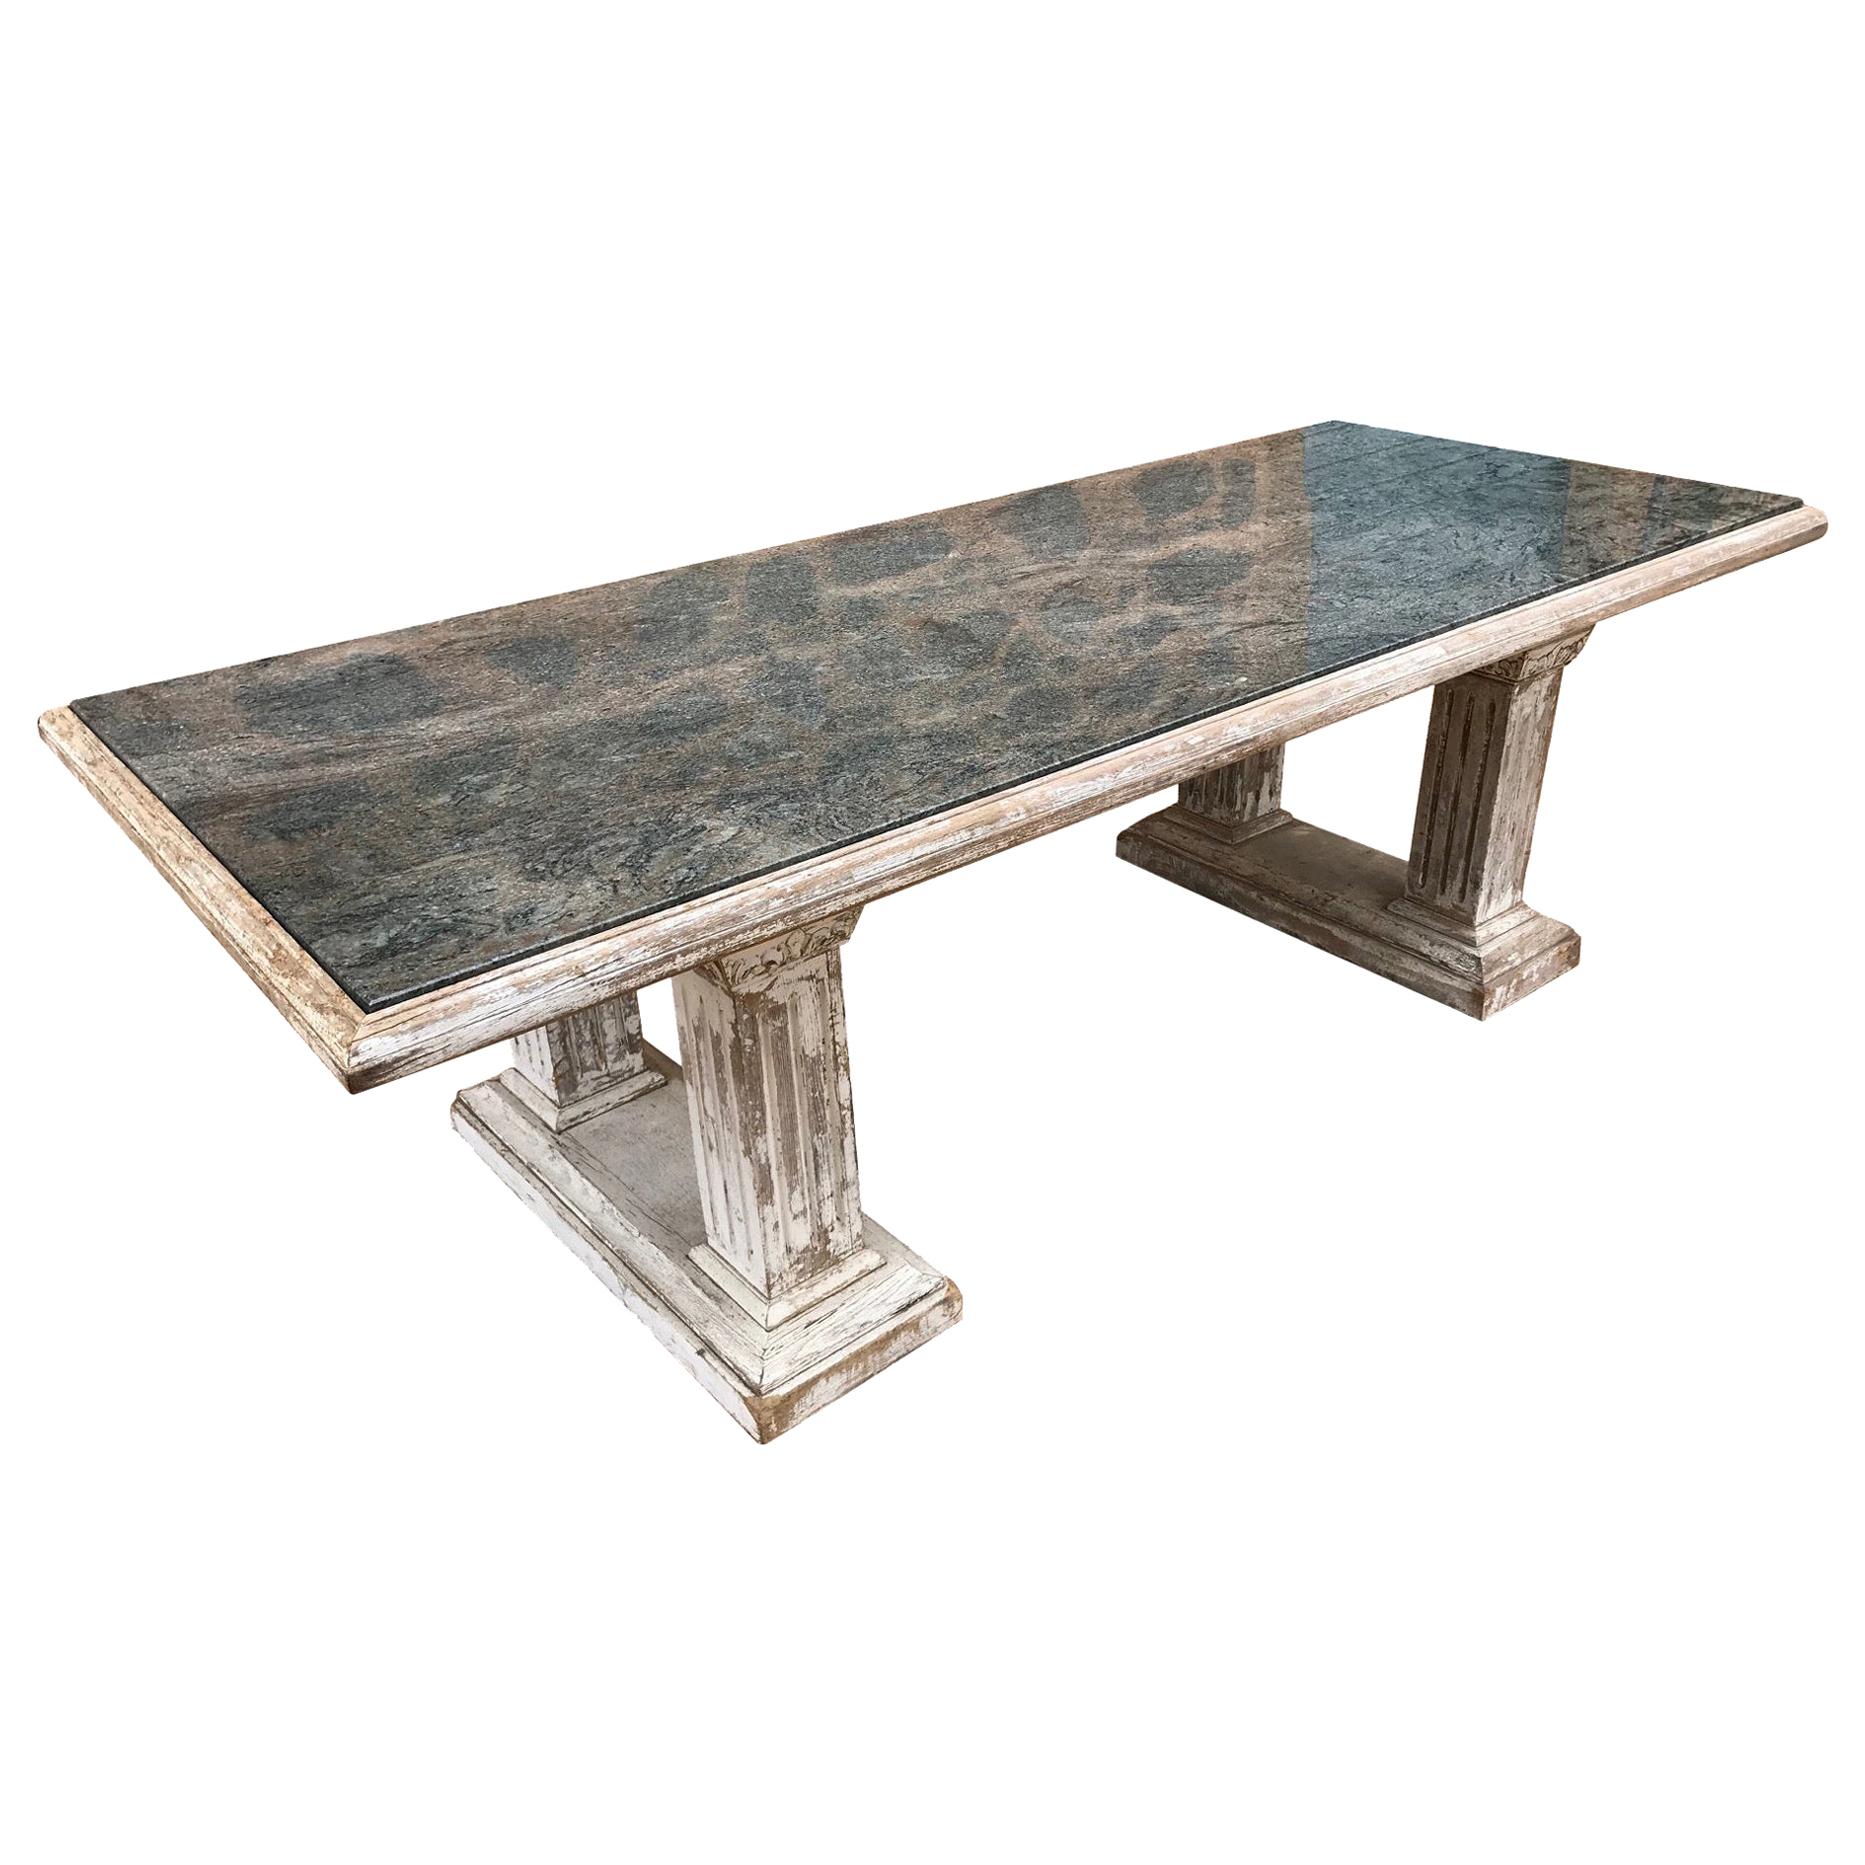 20th Century Italian Green Marble and Limed White Wood Table, 1950s